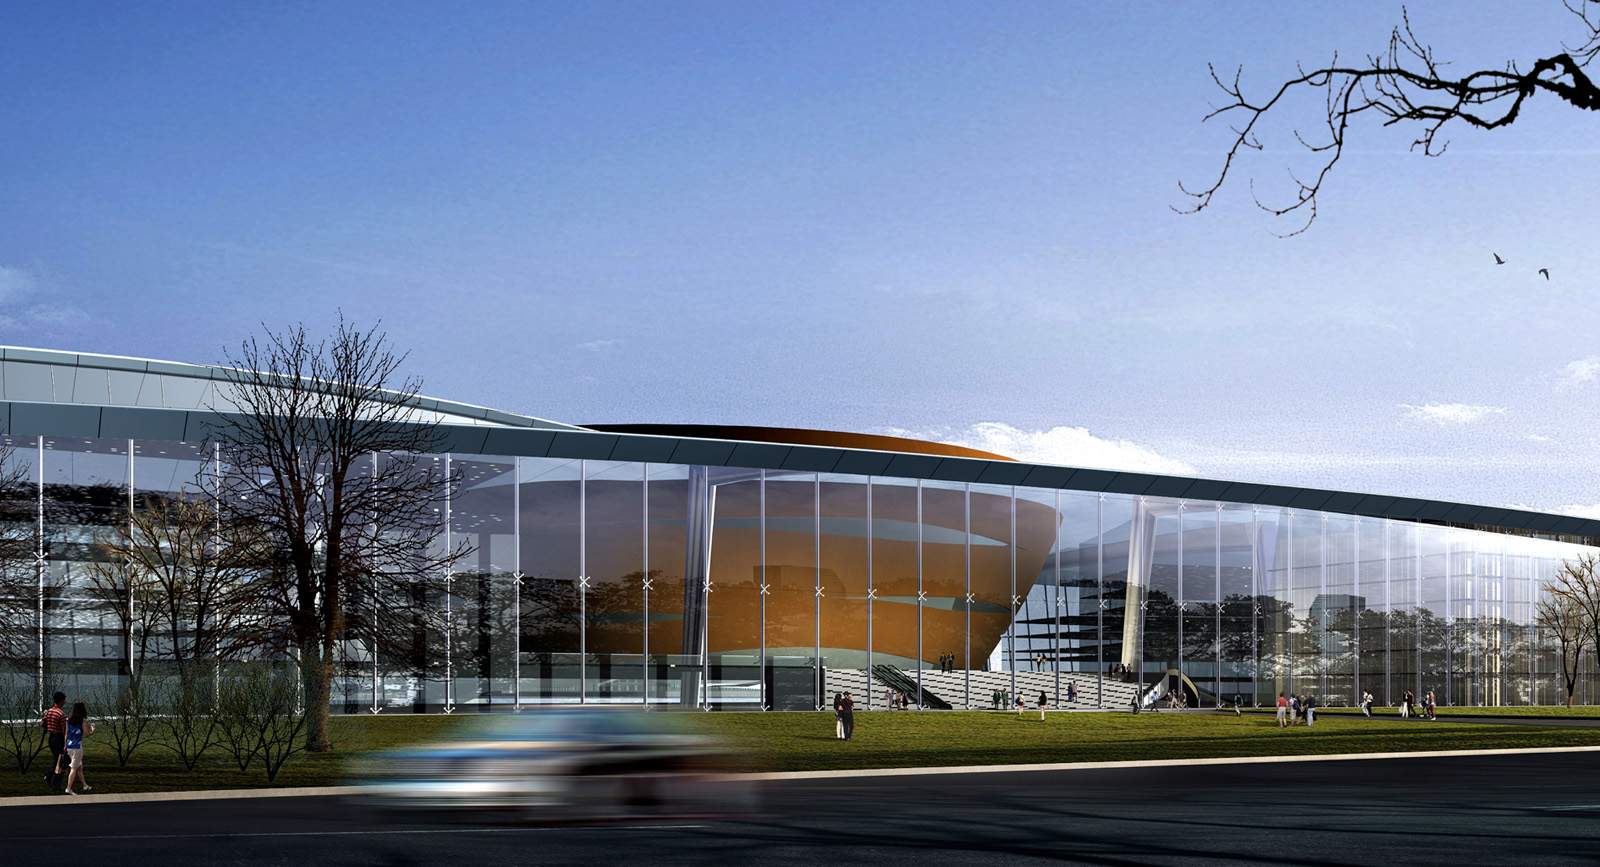 Competition - Wukesong Sports and cultural Center